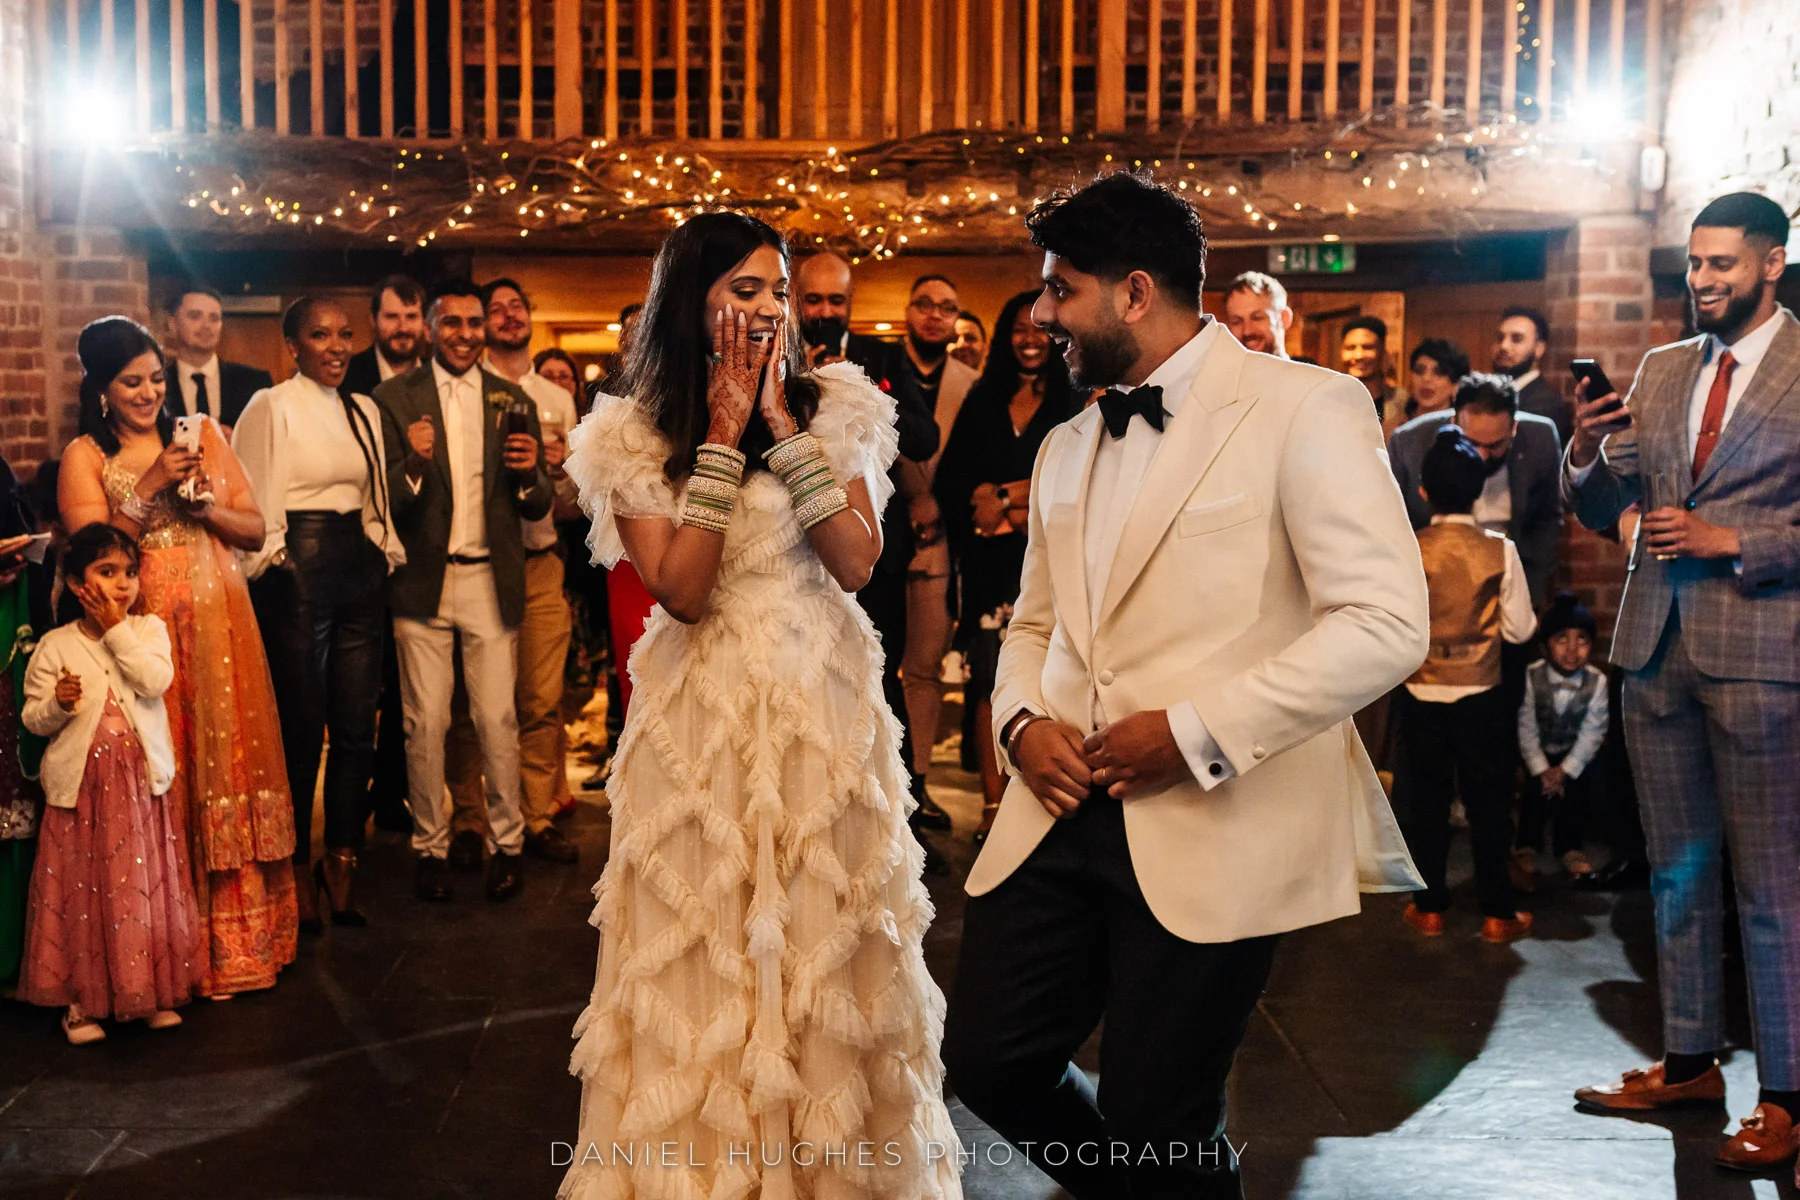 Gurpreet is serenading Kamrun during their first dance at Curradine Barns. Kamrun is holding her face in wondrous shock!